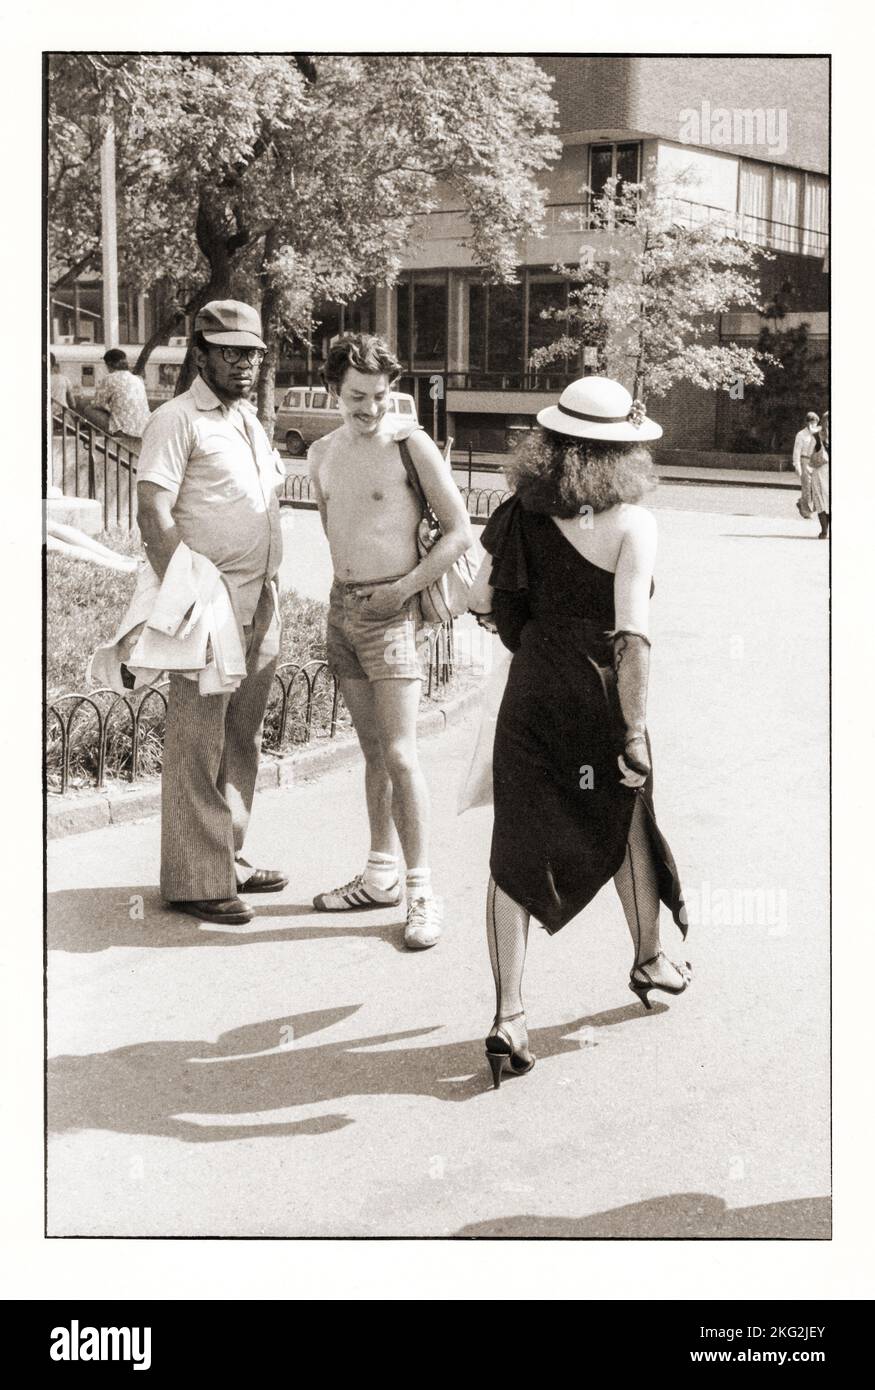 LEERING. 2 young man stare at an unusually dressed woman. In Washington Square Park in Manhattan, New York City, circa 1979. Stock Photo